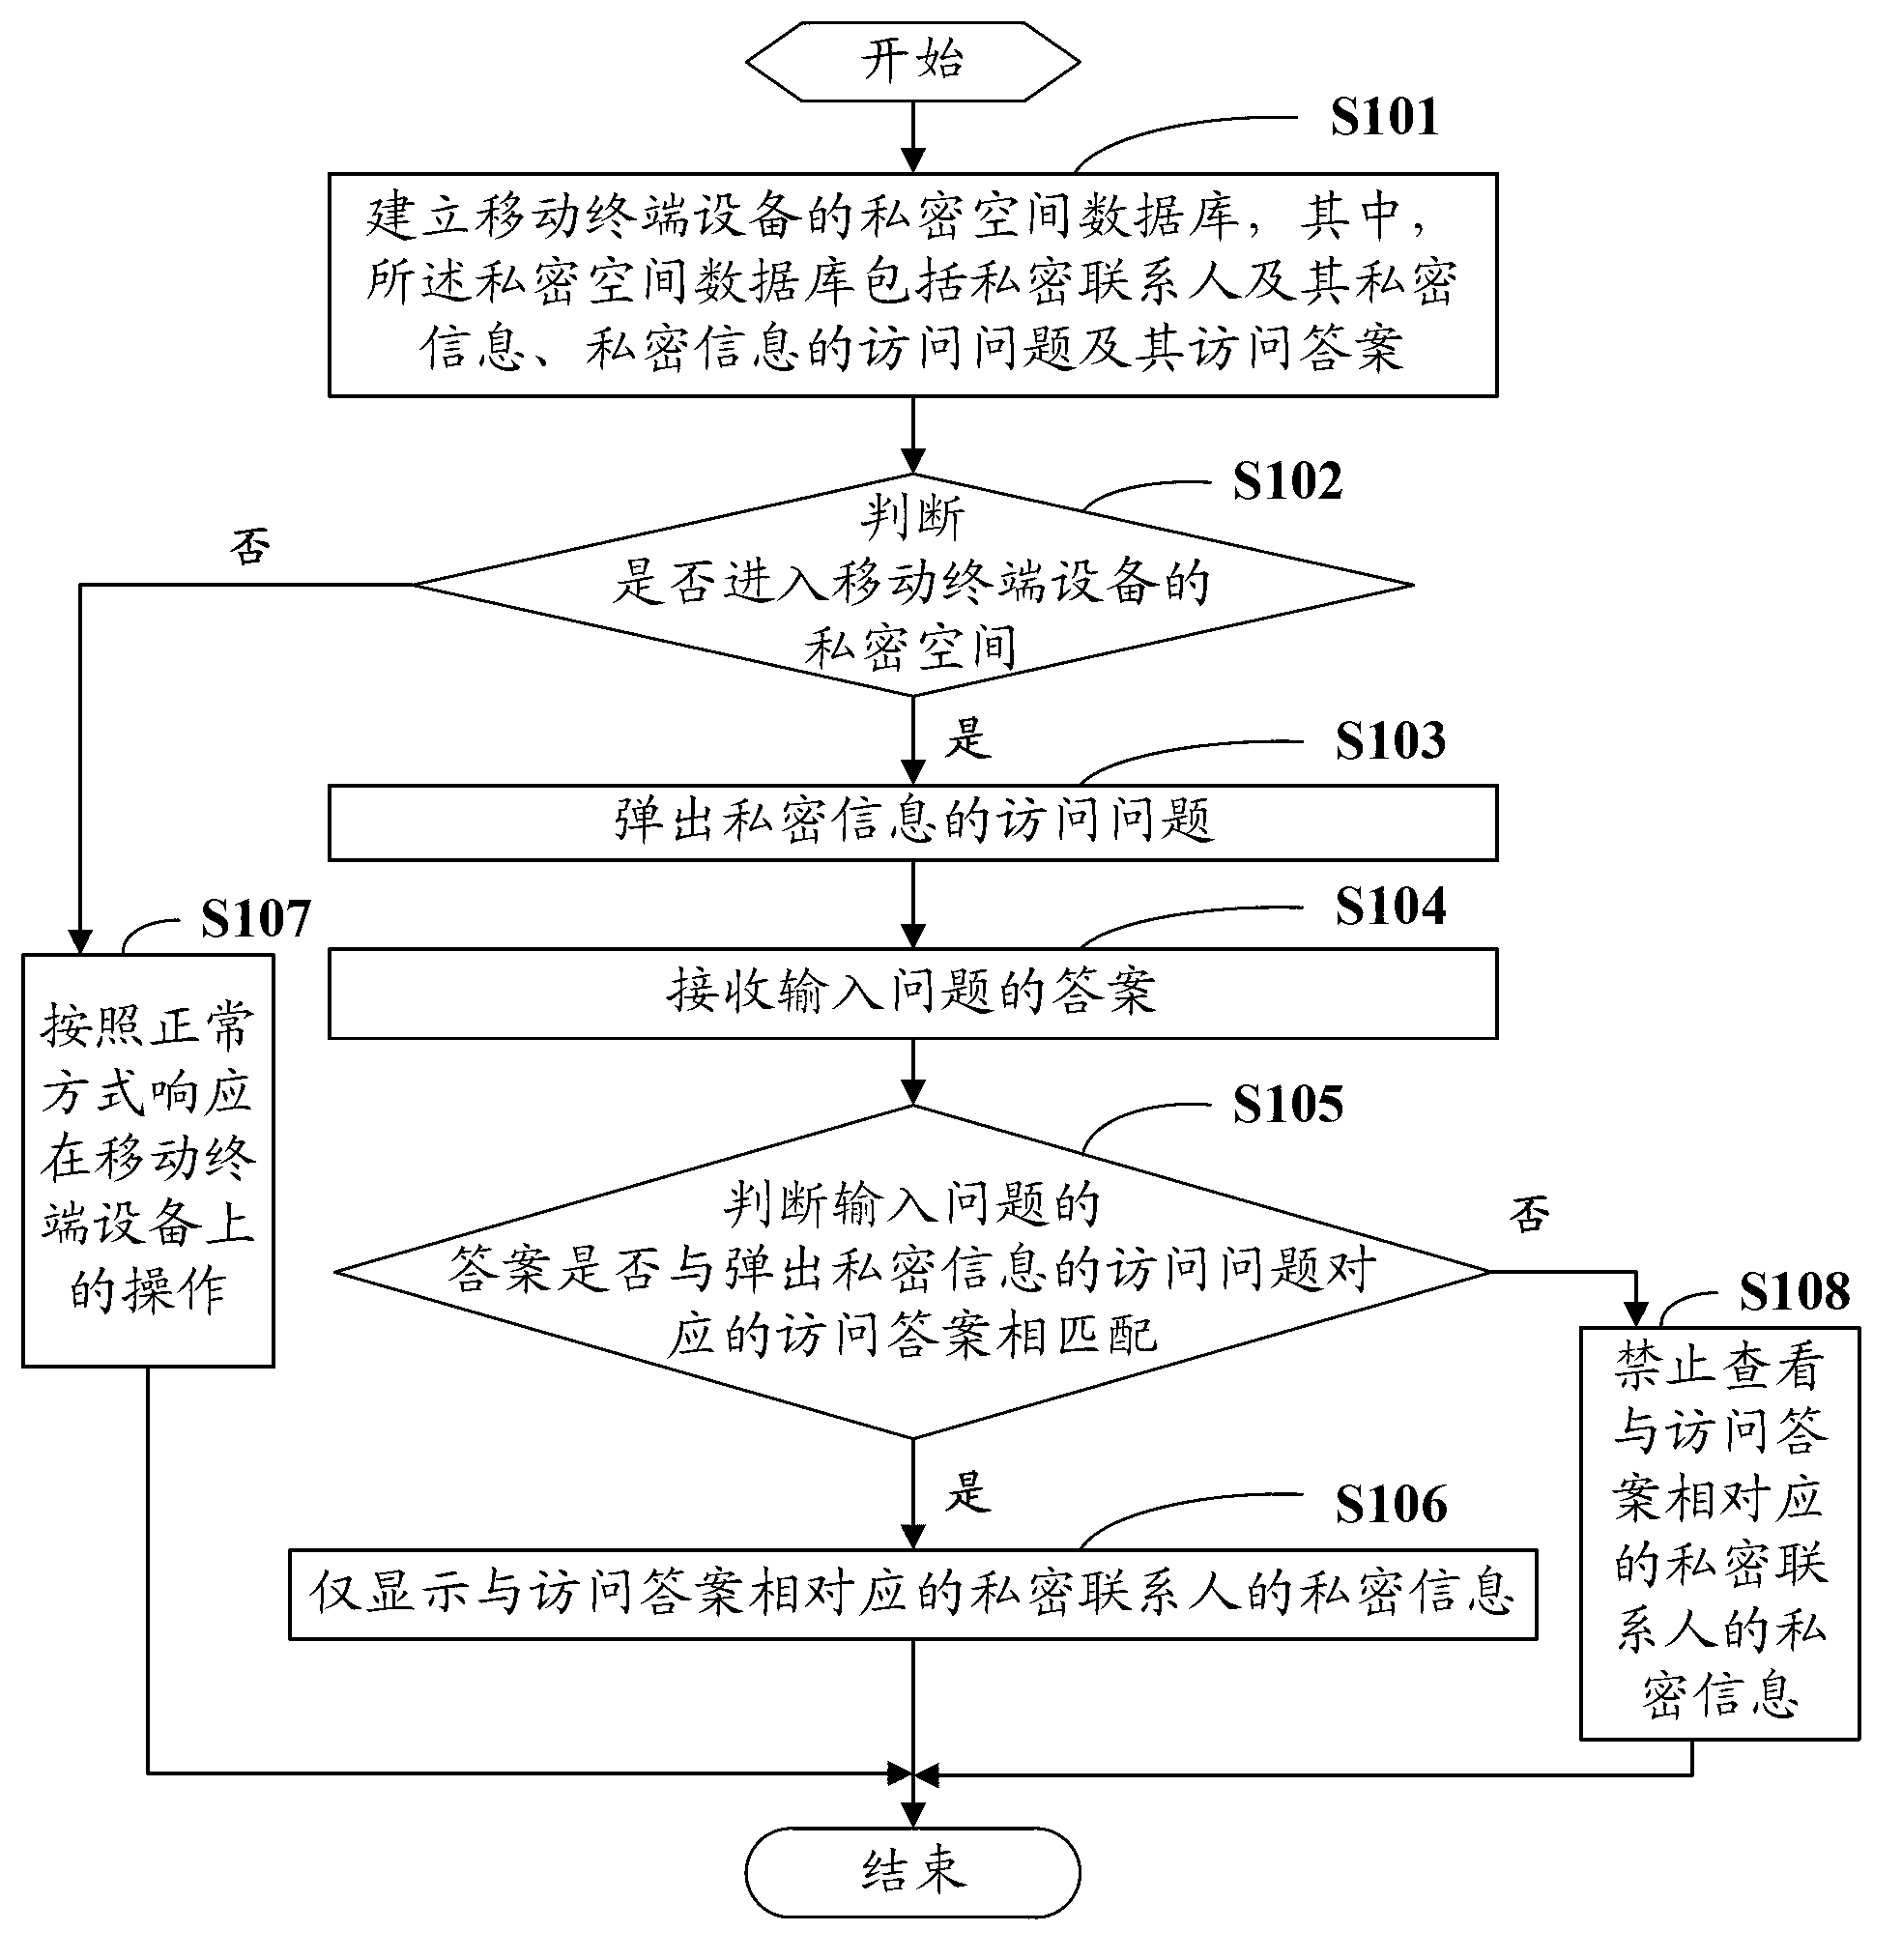 Private information viewing method and system based on mobile terminal equipment